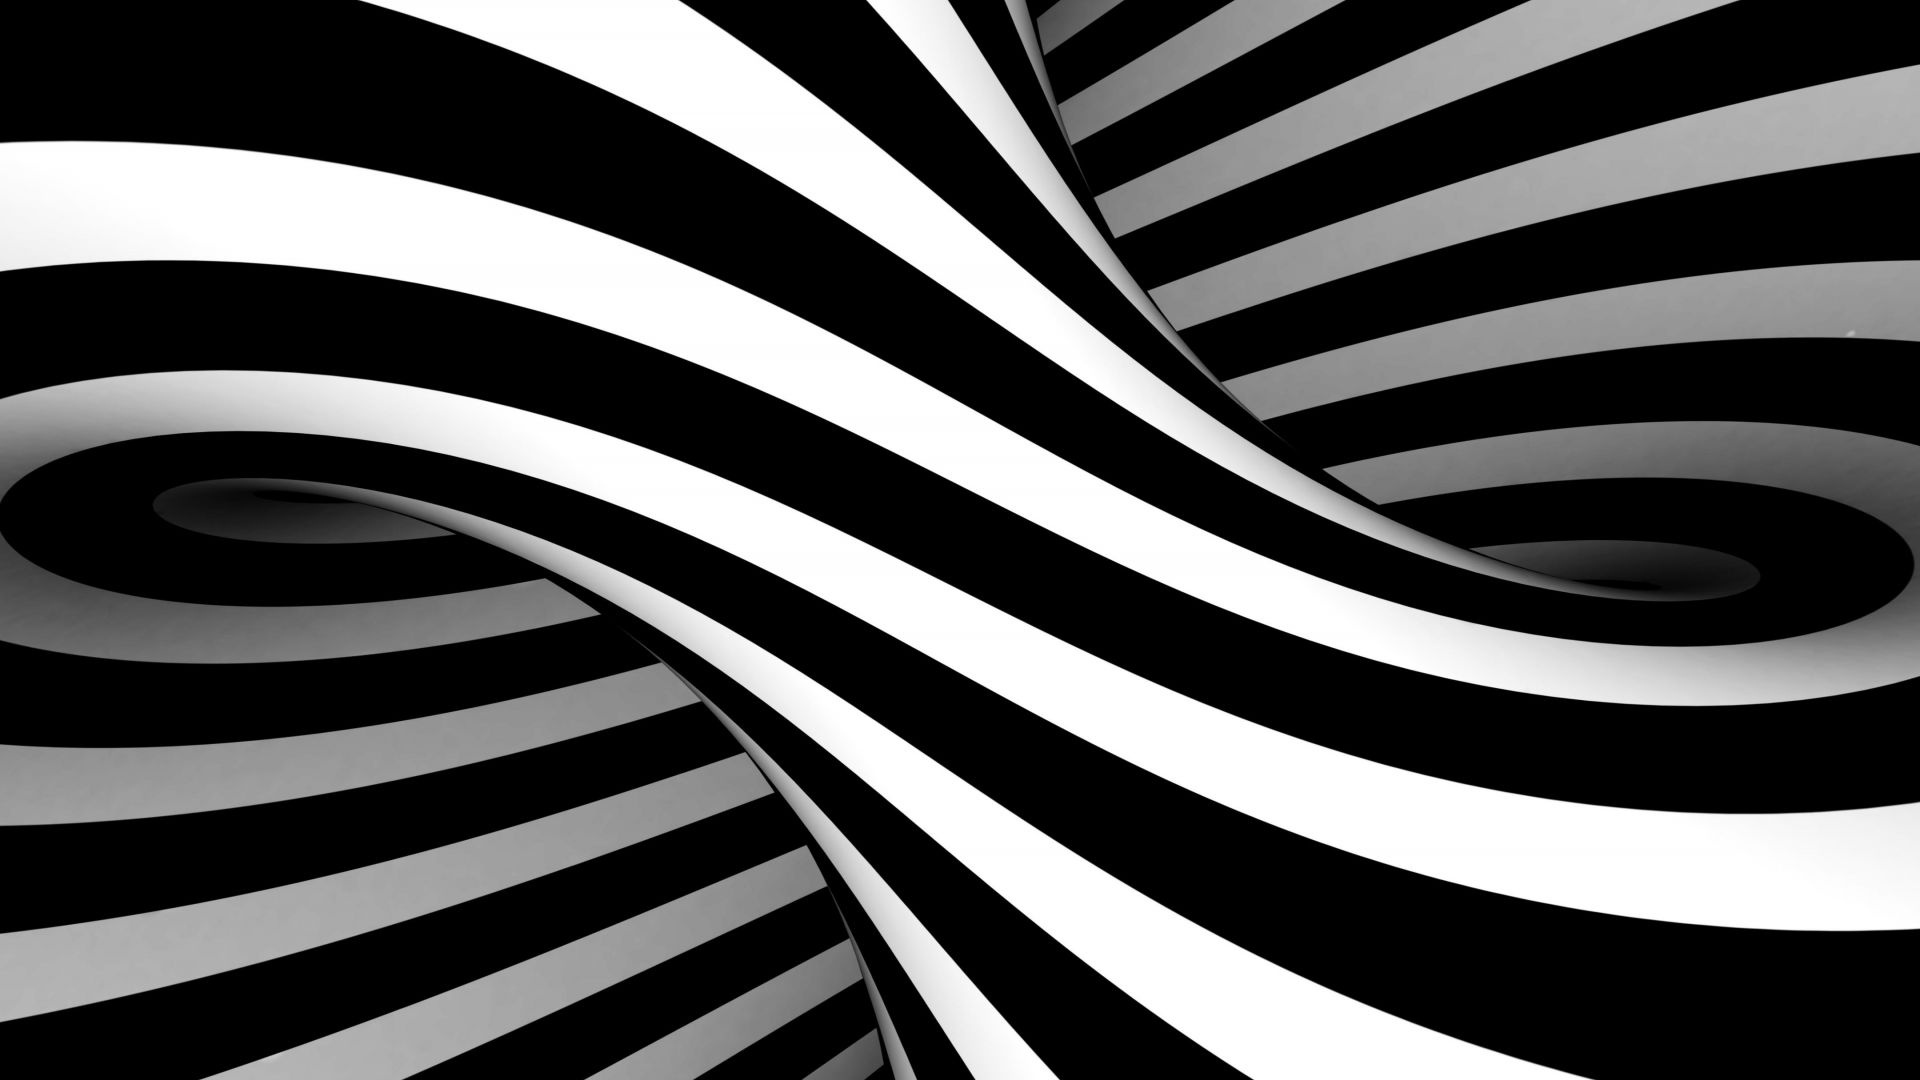 Black and white, Stripes, Optical illusion art, Abstract wallpaper, 1920x1080 Full HD Desktop